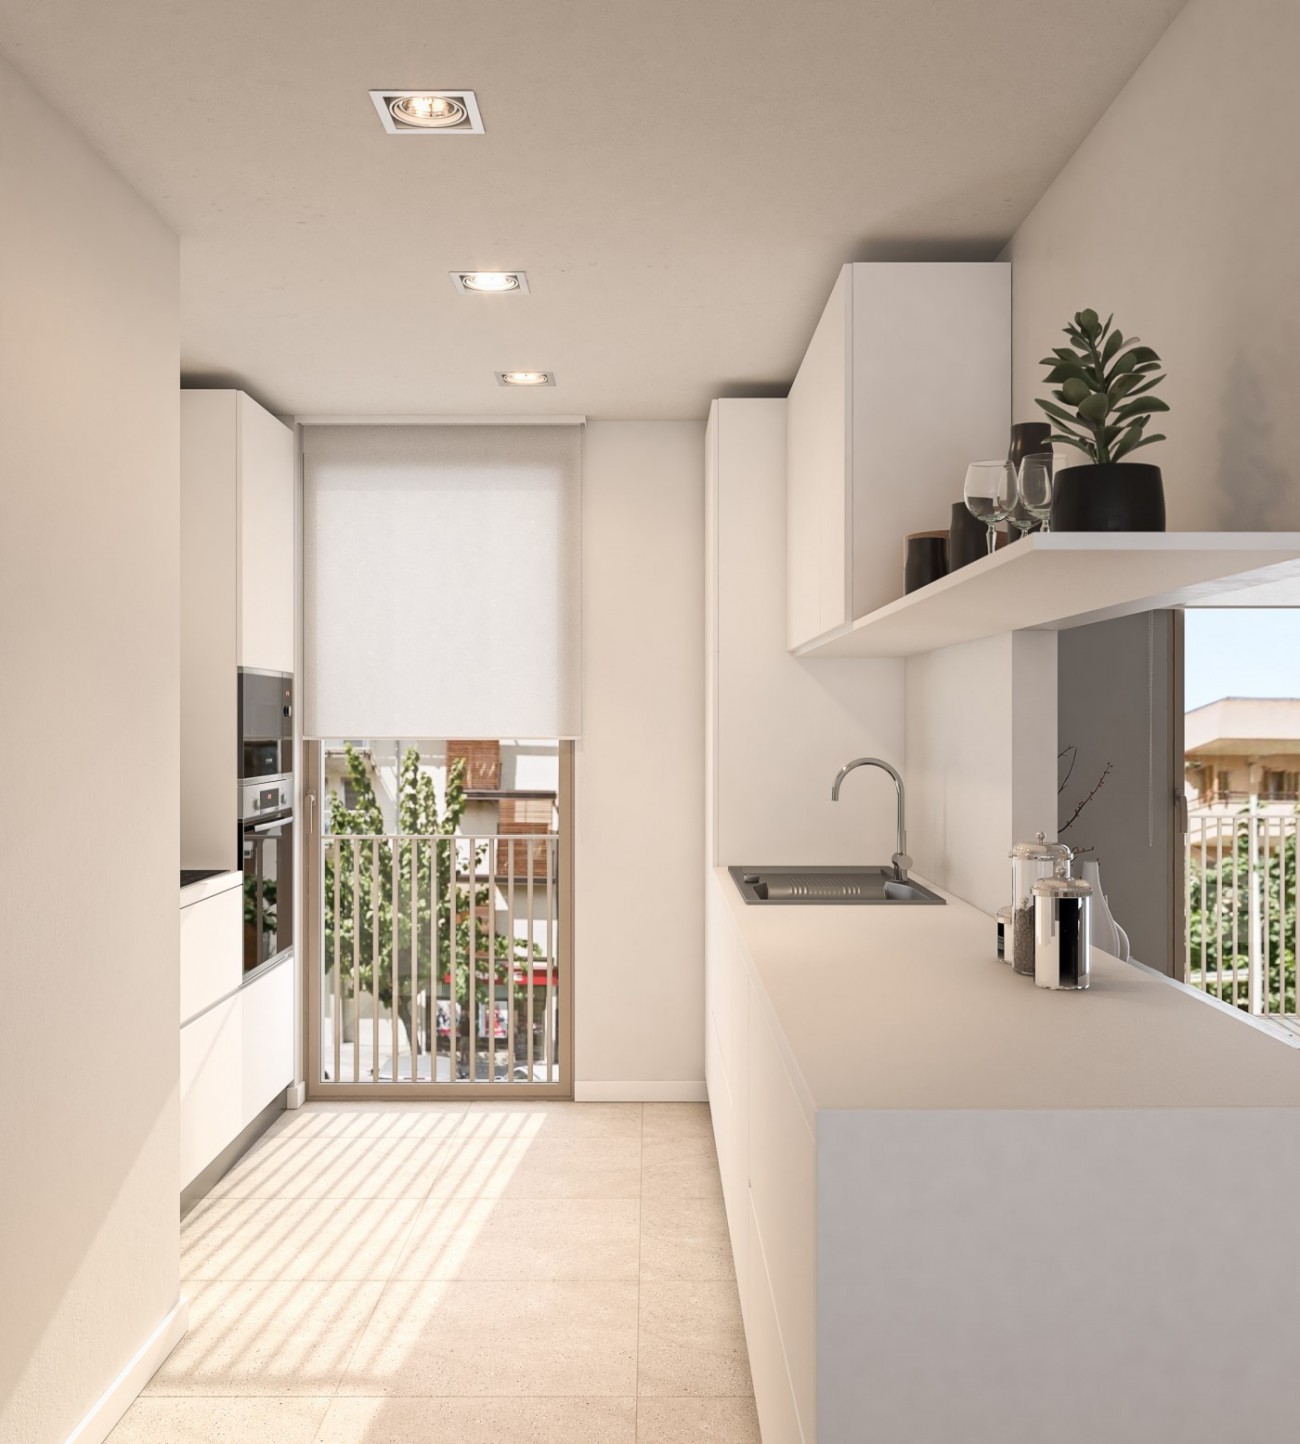 Living area: 82 m² Bedrooms: 2  - New and exclusive luxury apartments for sale in Pollensa #23264 - 16